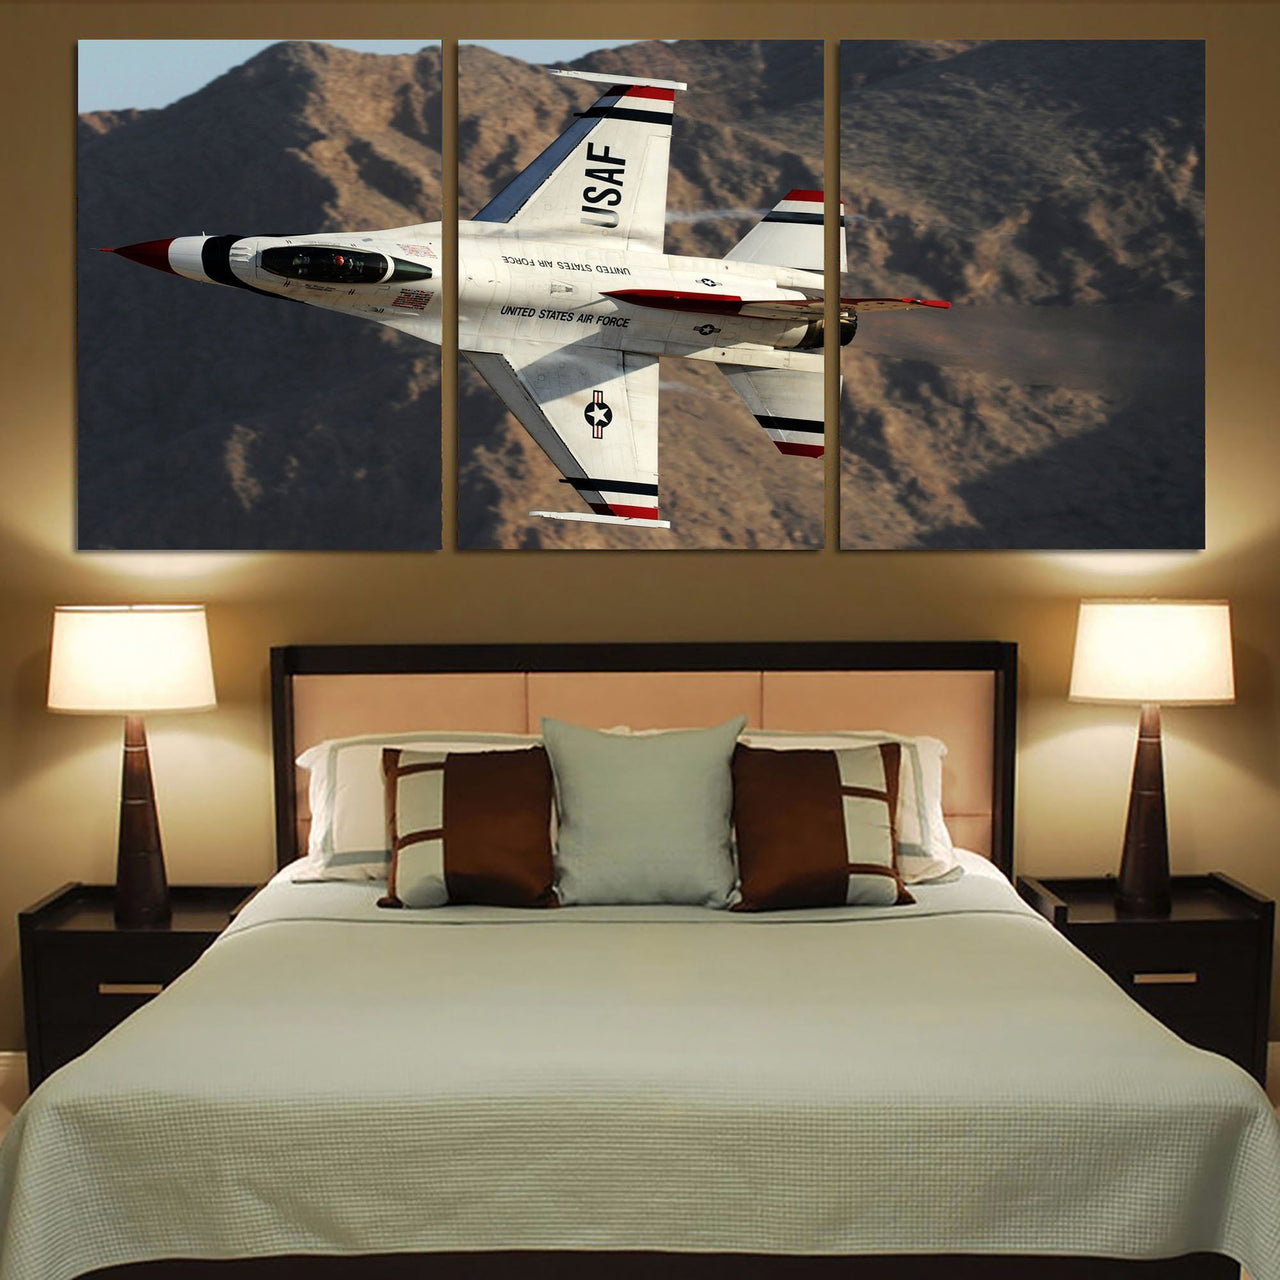 Amazing Show by Fighting Falcon F16 Printed Canvas Posters (3 Pieces) Aviation Shop 